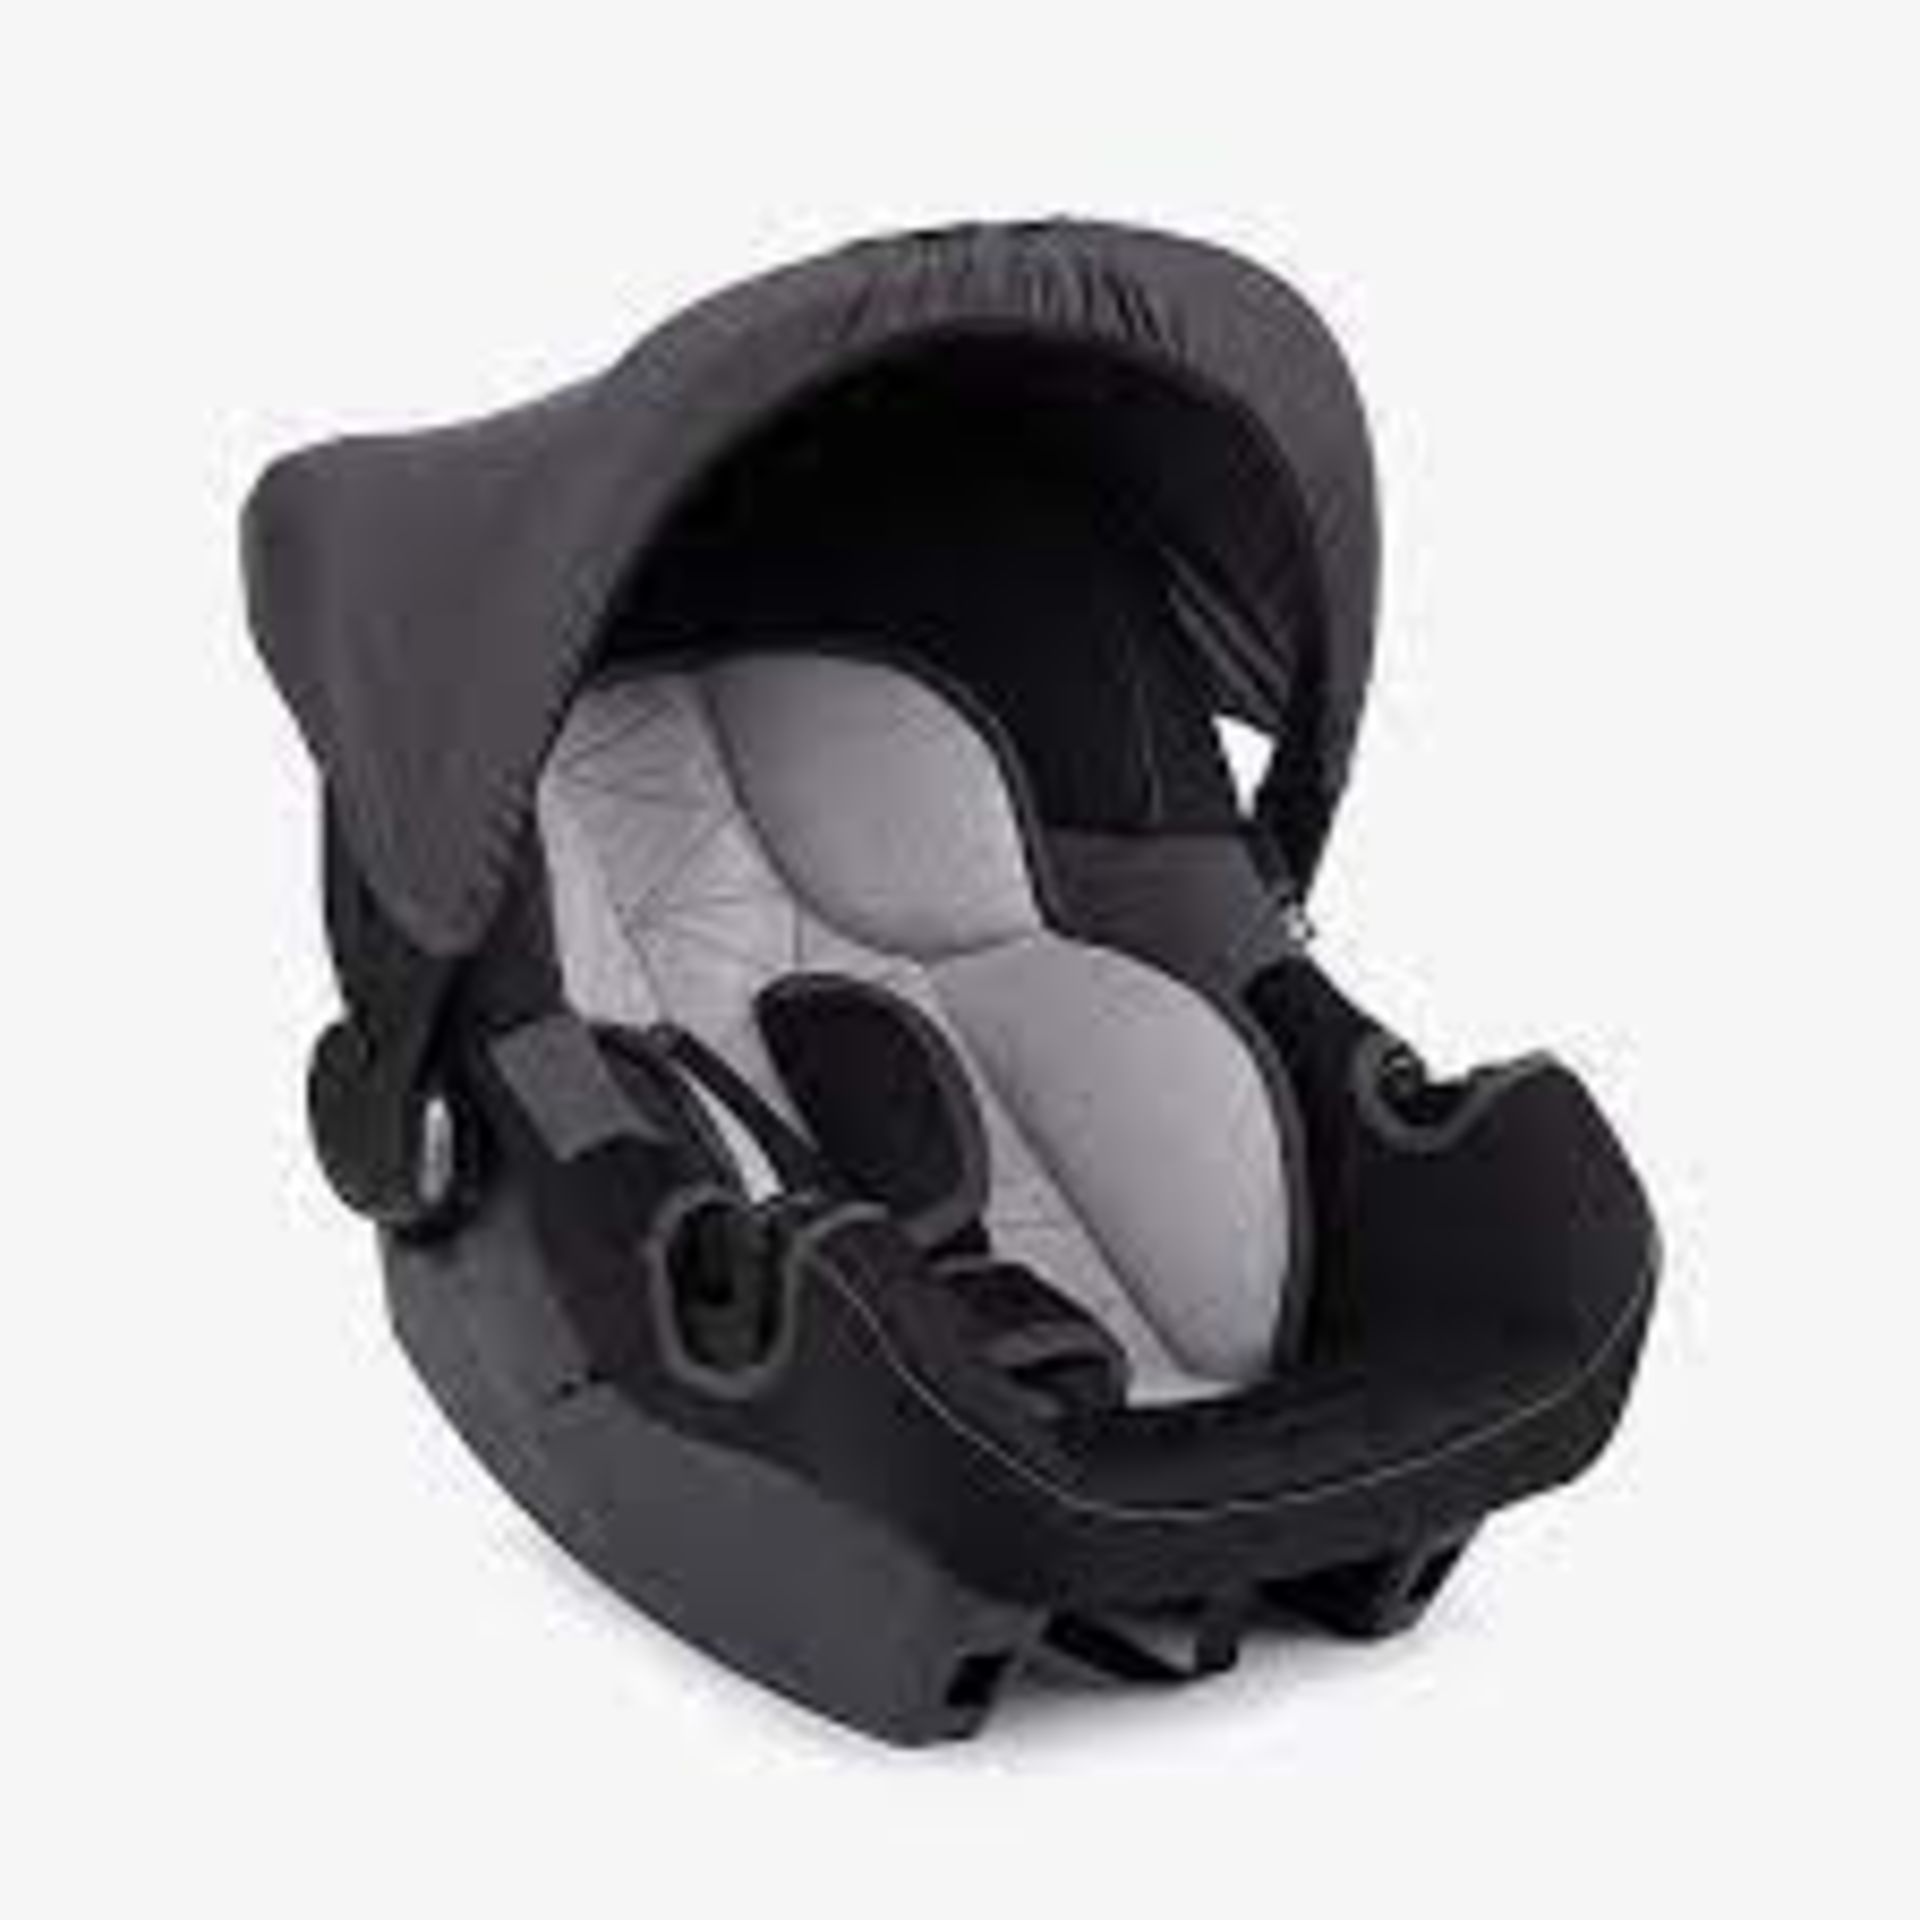 BRAND NEW MOTHERCARE ZIBA UNIVERSAL CAR SEAT BLACK AND GREY R13 - Image 2 of 2